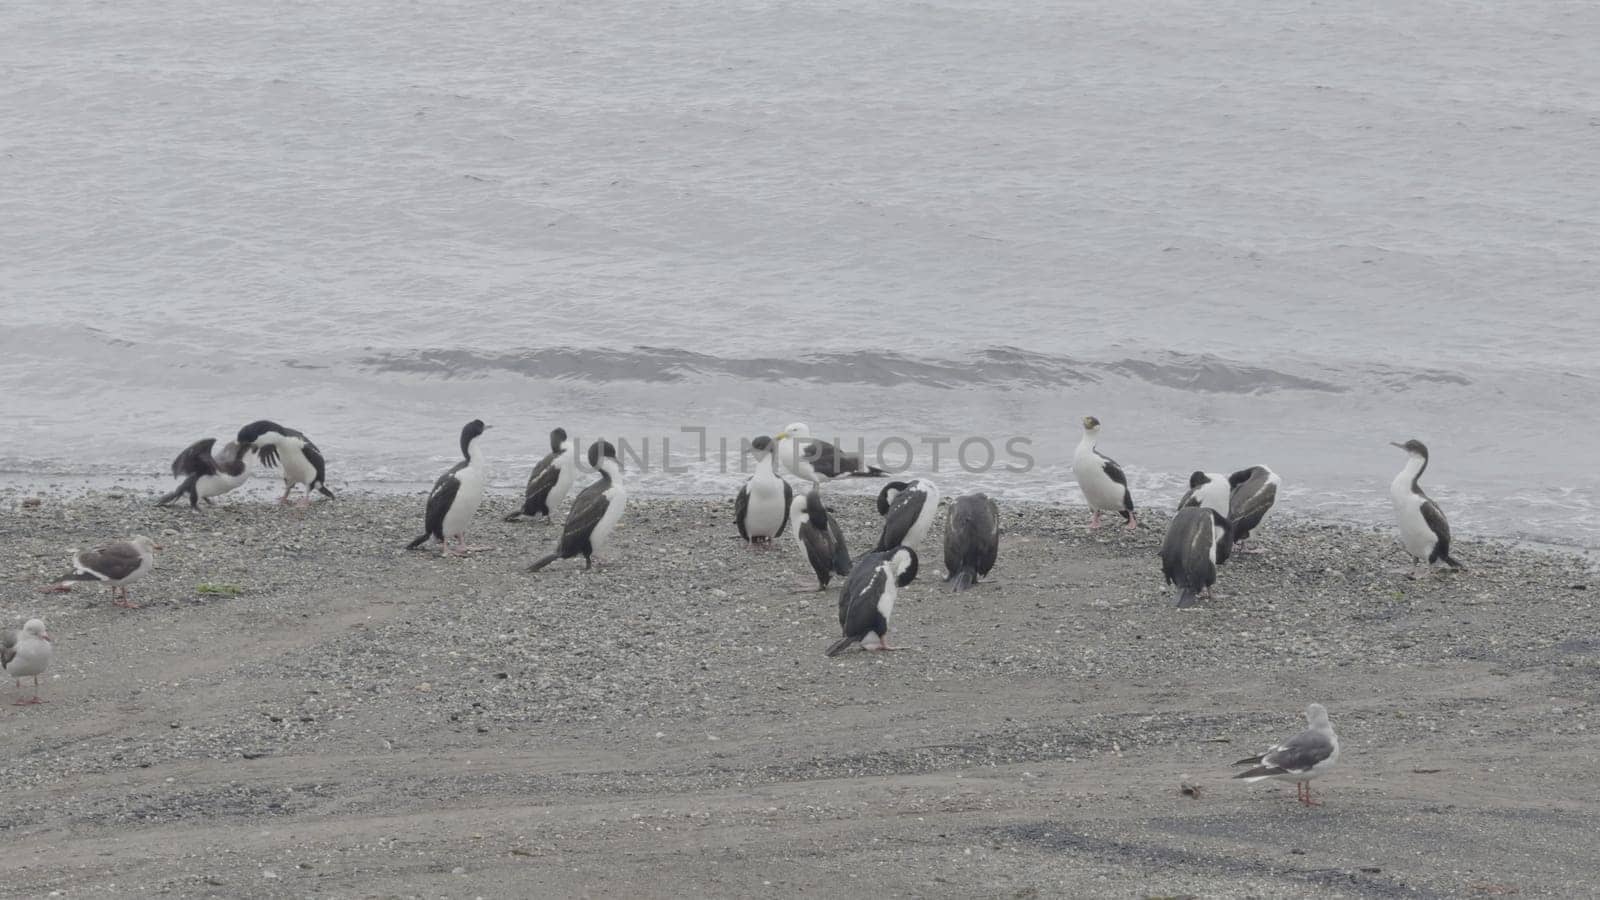 A group of emperor cormorants gathers on a beach, with one parent feeding a chick as others observe quietly.